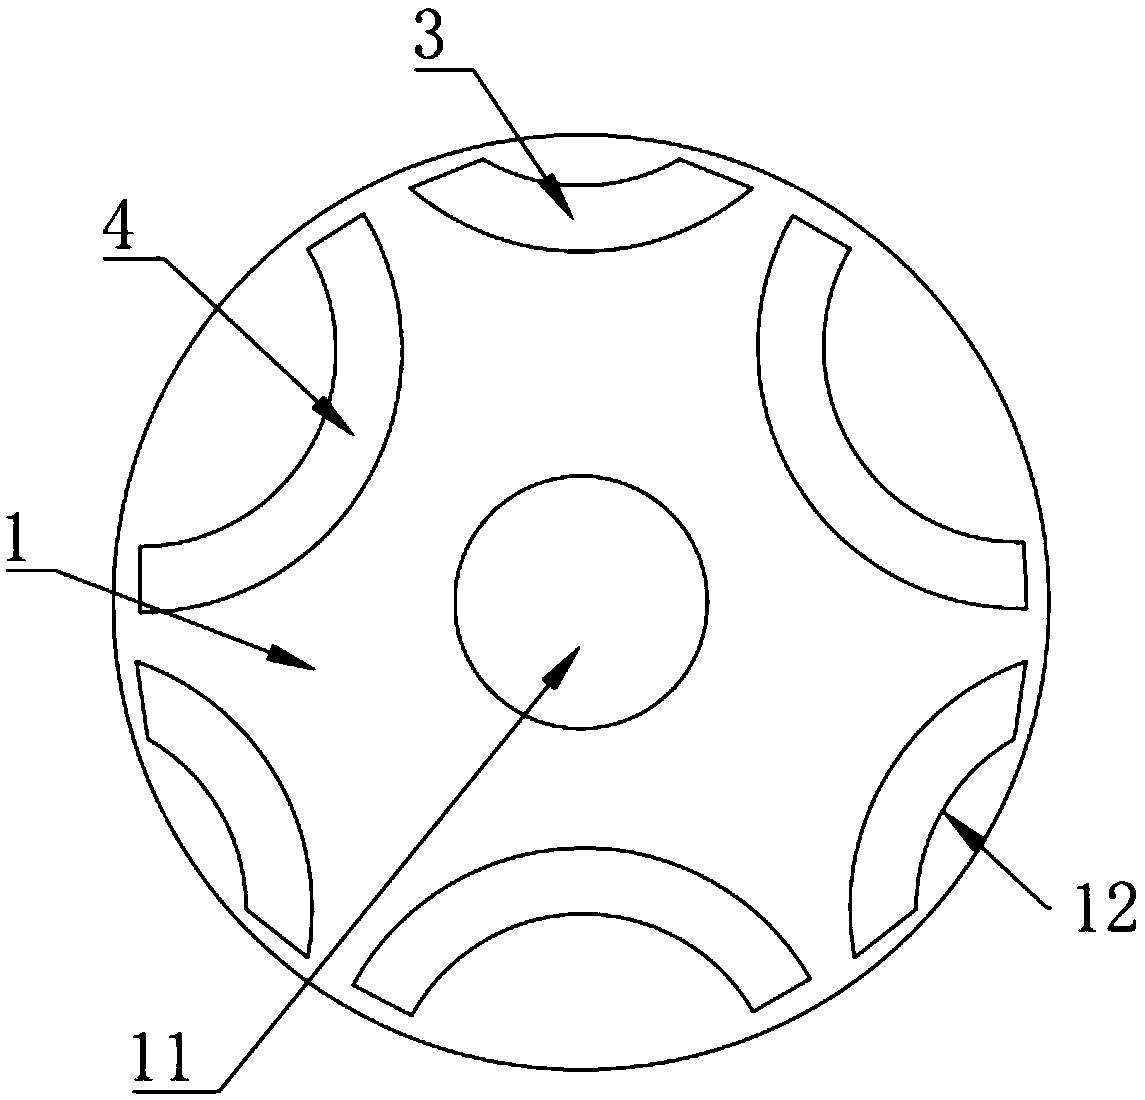 A rotor structure, permanent magnet synchronous motor and compressor